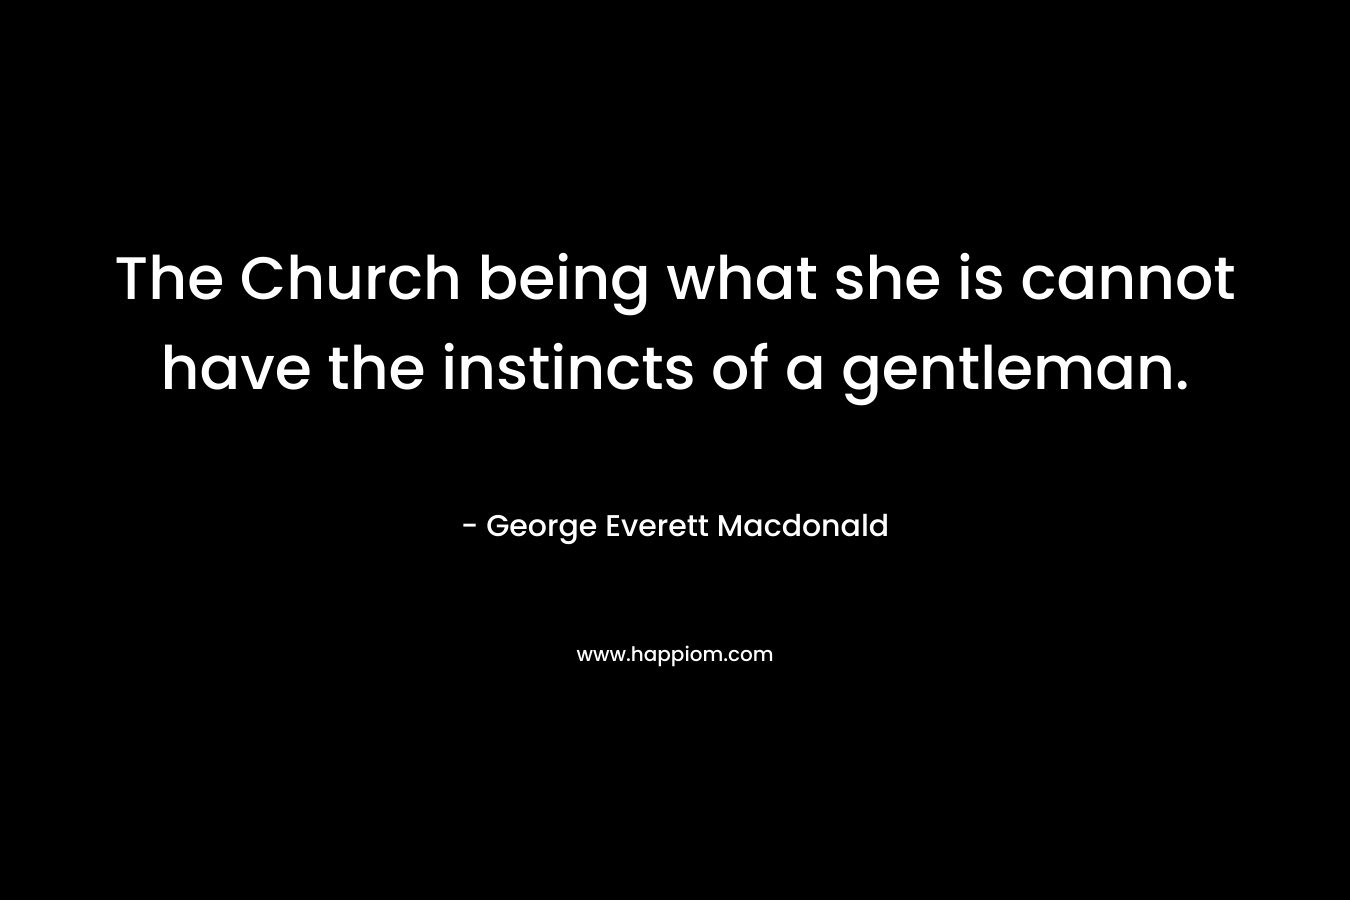 The Church being what she is cannot have the instincts of a gentleman. – George Everett Macdonald